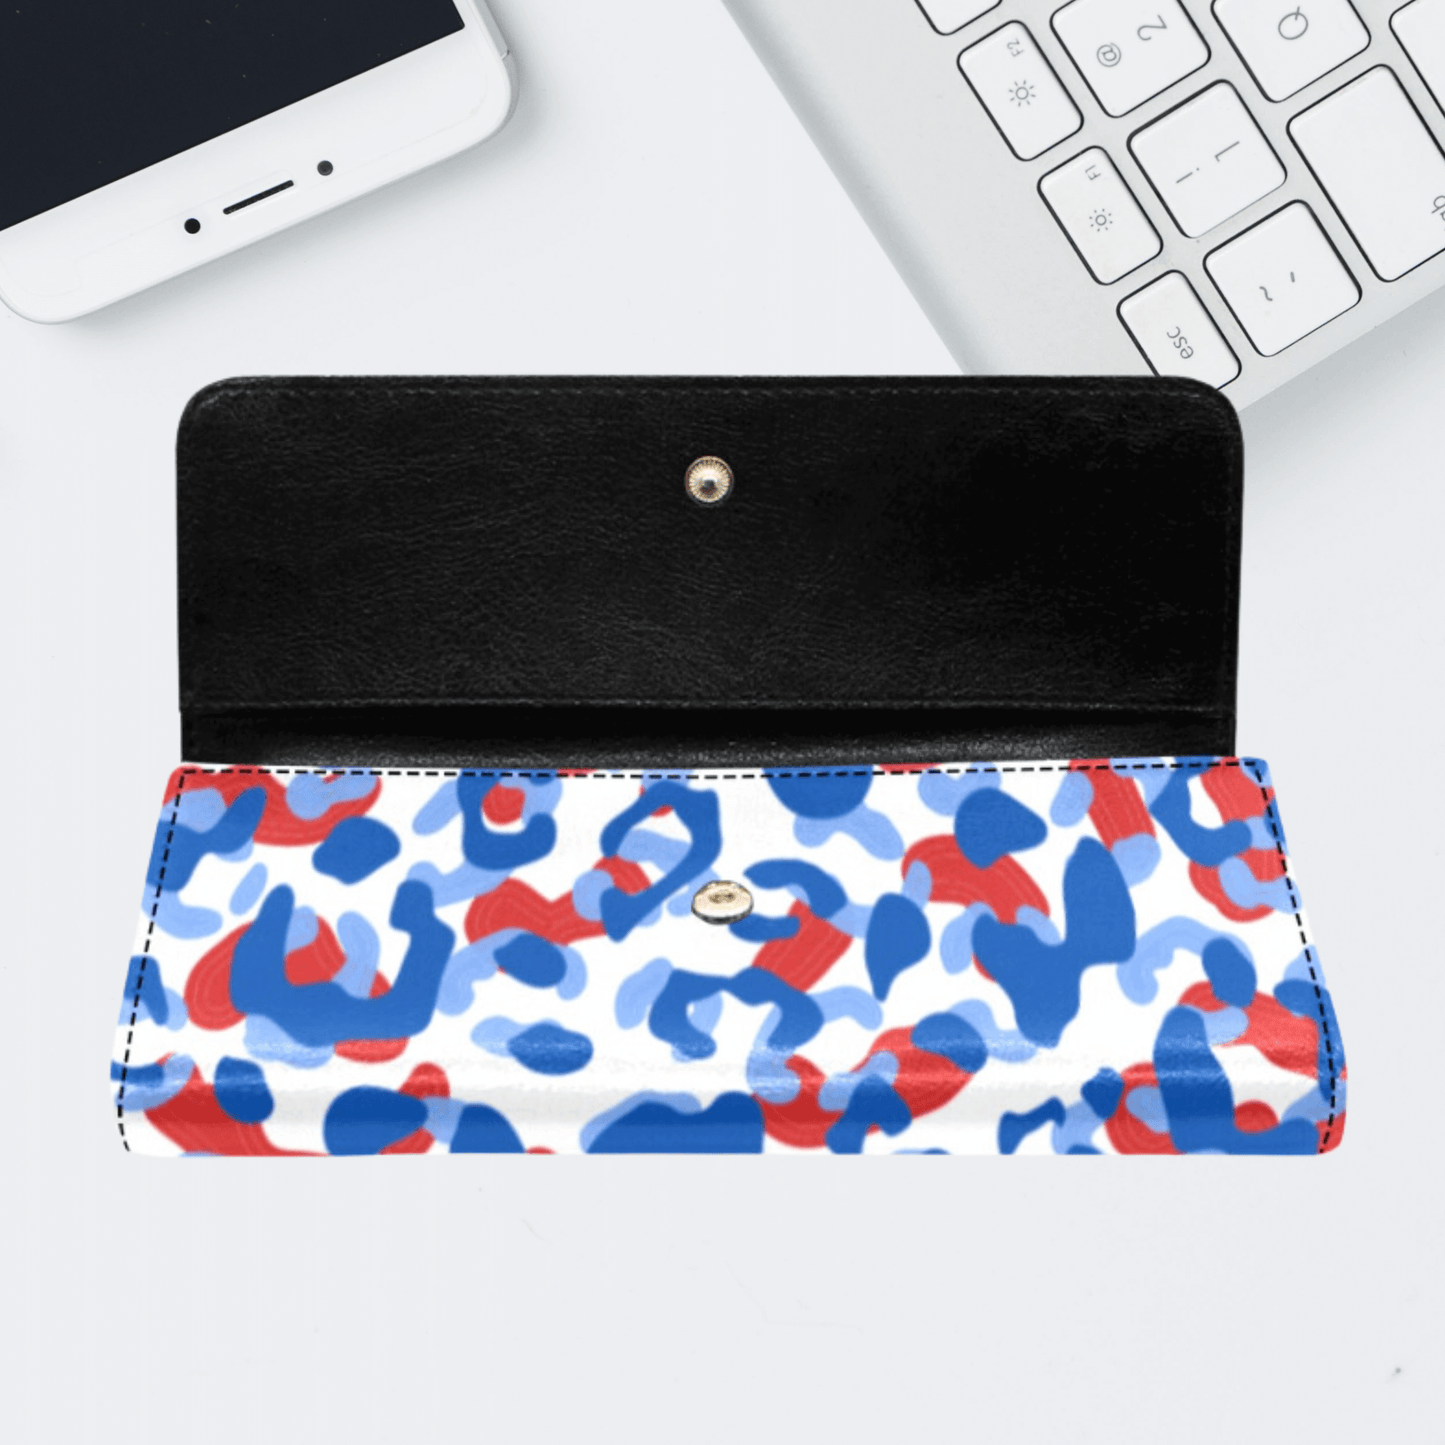 Tri-Fold Wallet for Her, Red, White & Blue Leopard Print Custom Wallet